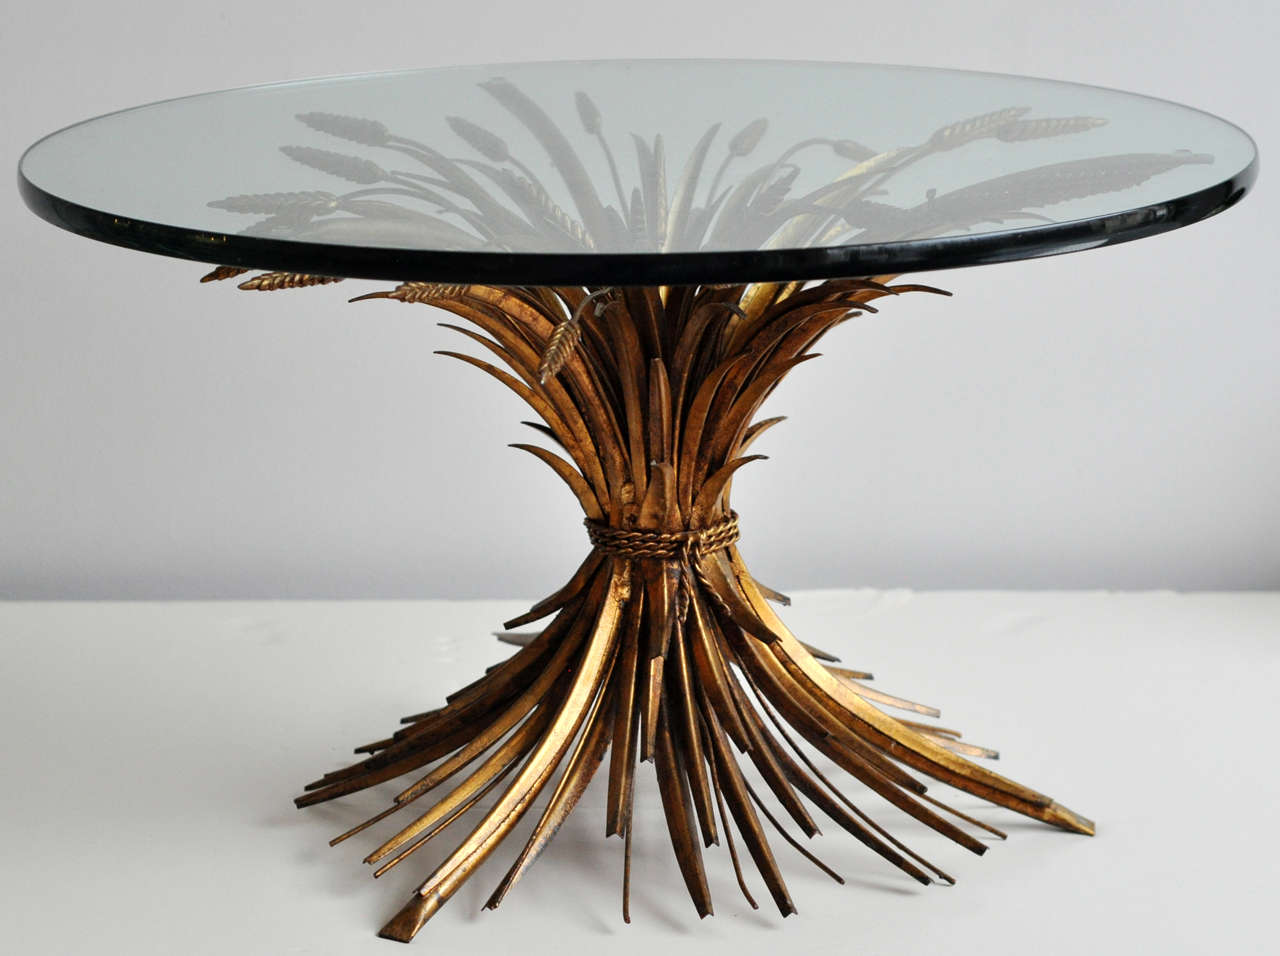 Beautifully-designed and constructed sheaf of wheat table with original gold leaf finish.  It can be used as a coffee or side table. There is the original 